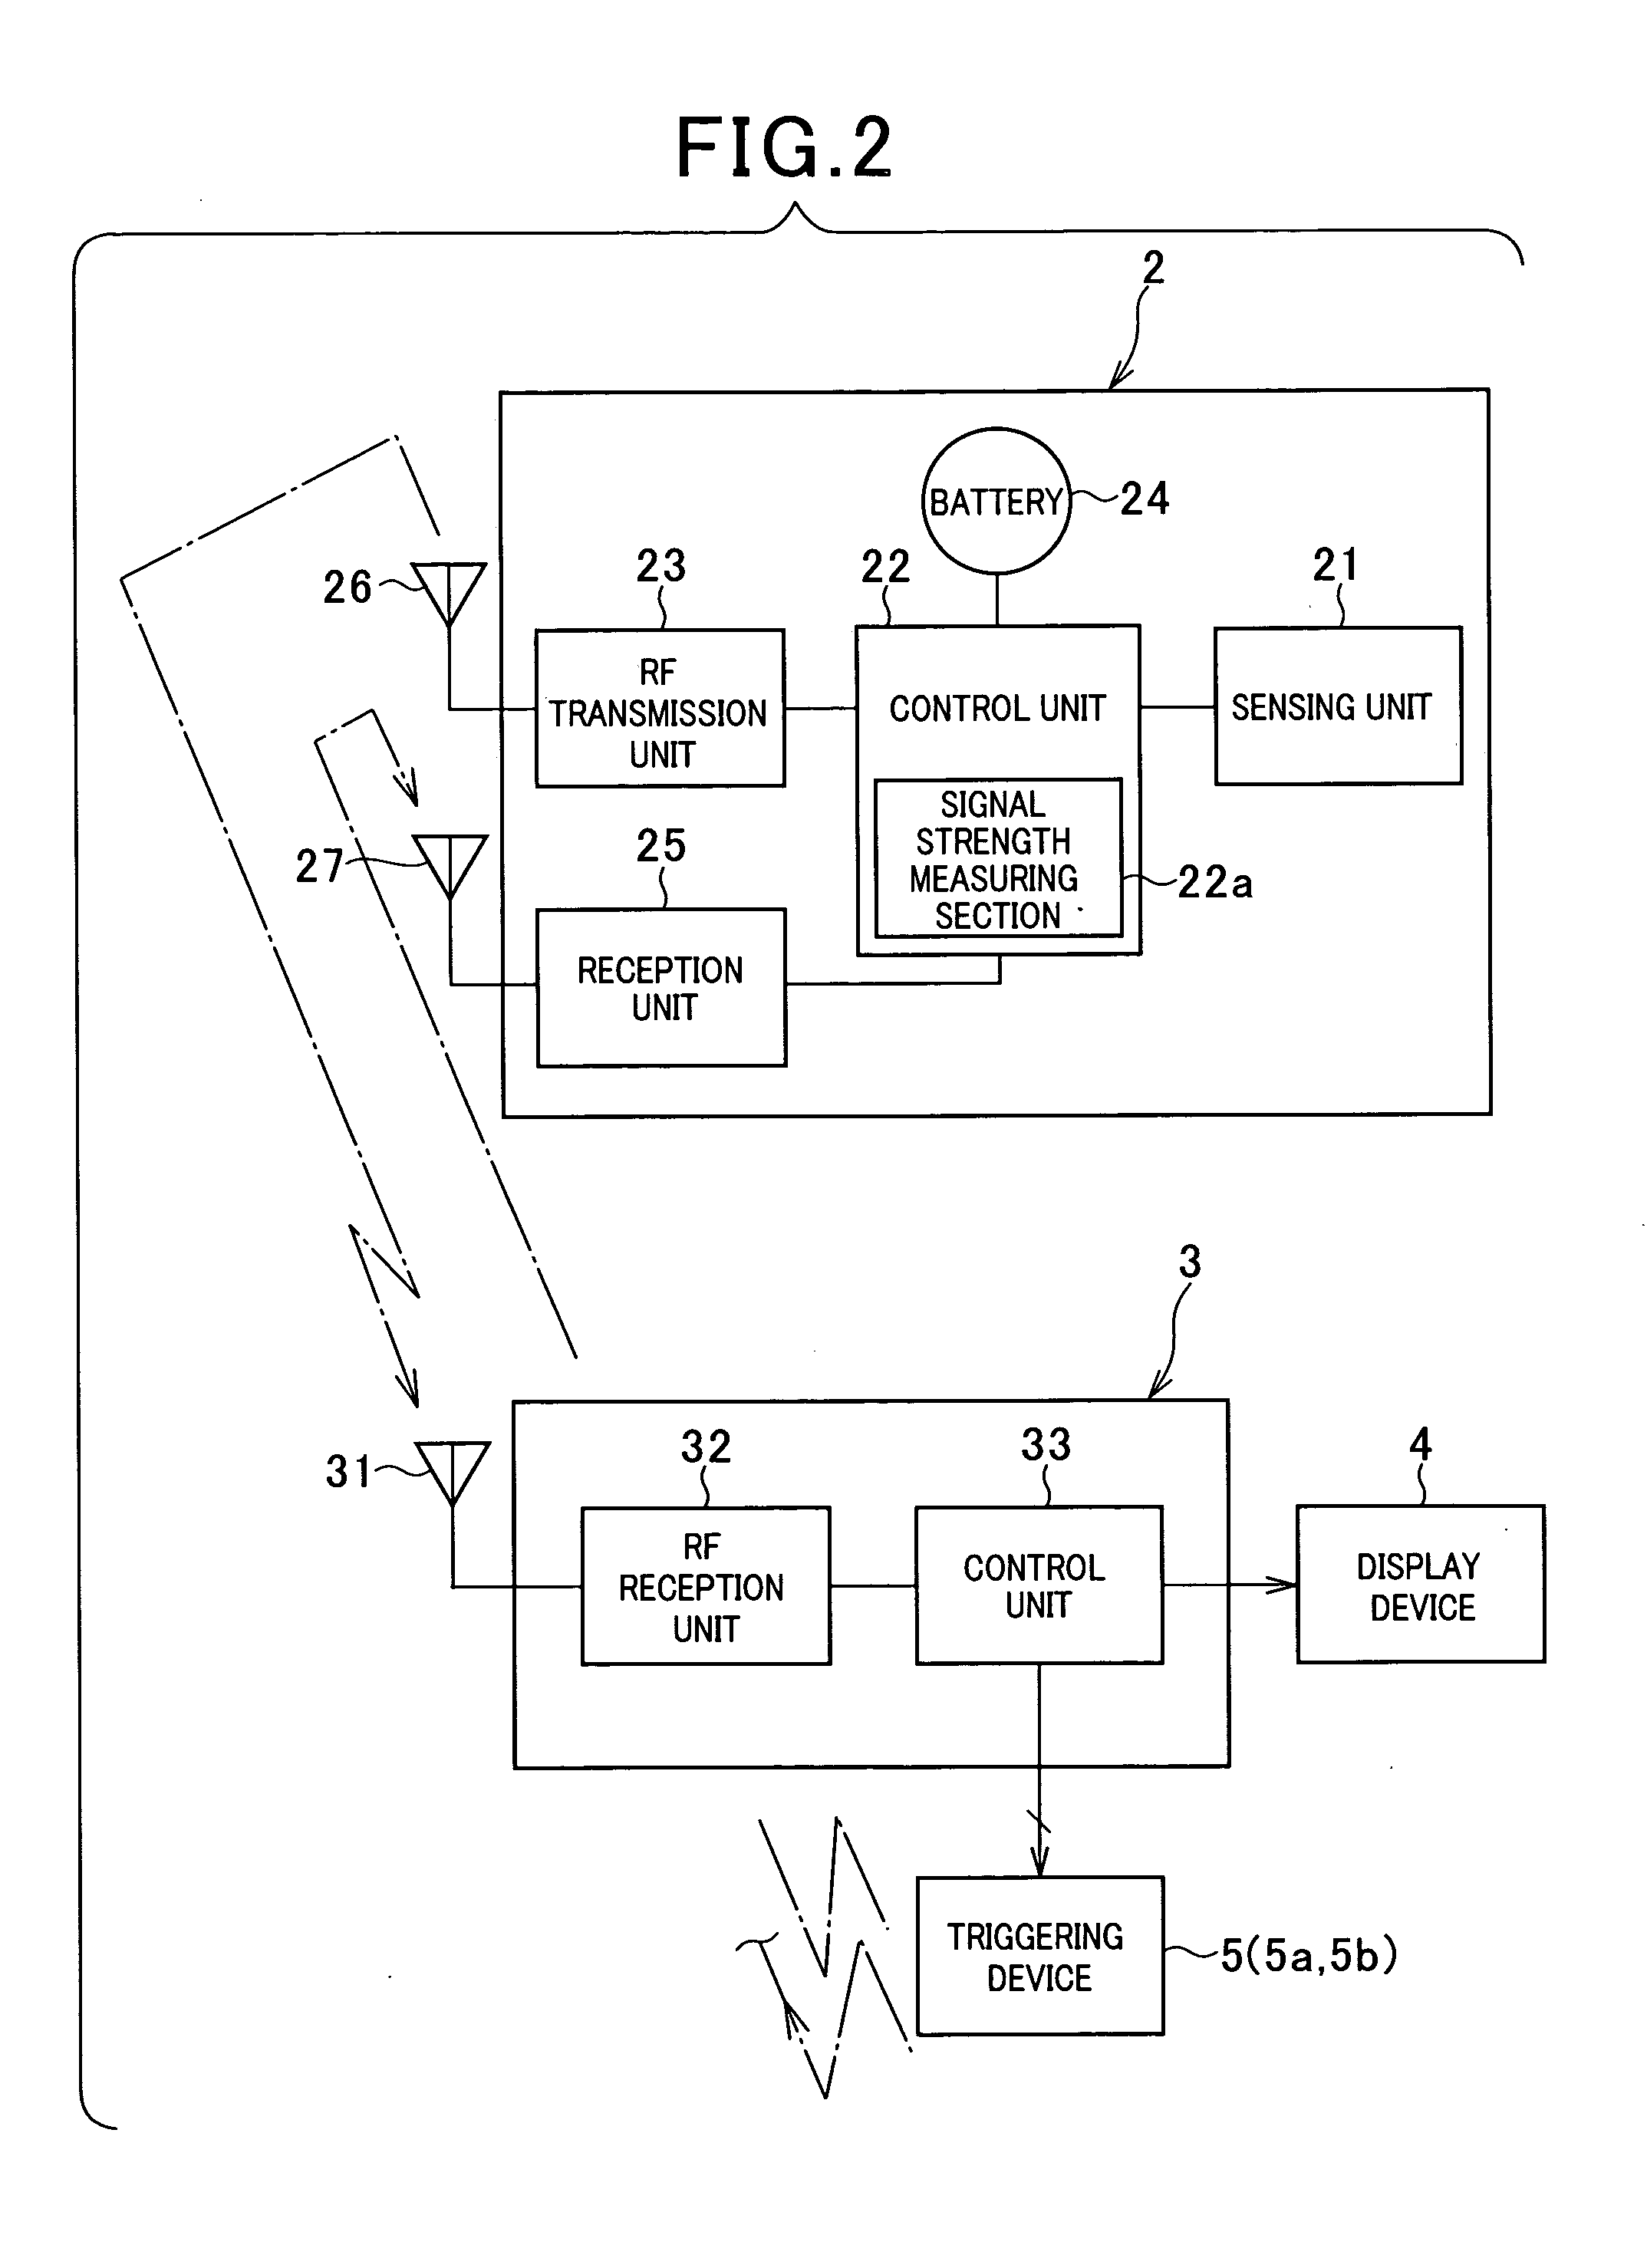 Apparatus for detecting positions of wheels of vehicle and apparatus for detecting tire inflation pressure using the same